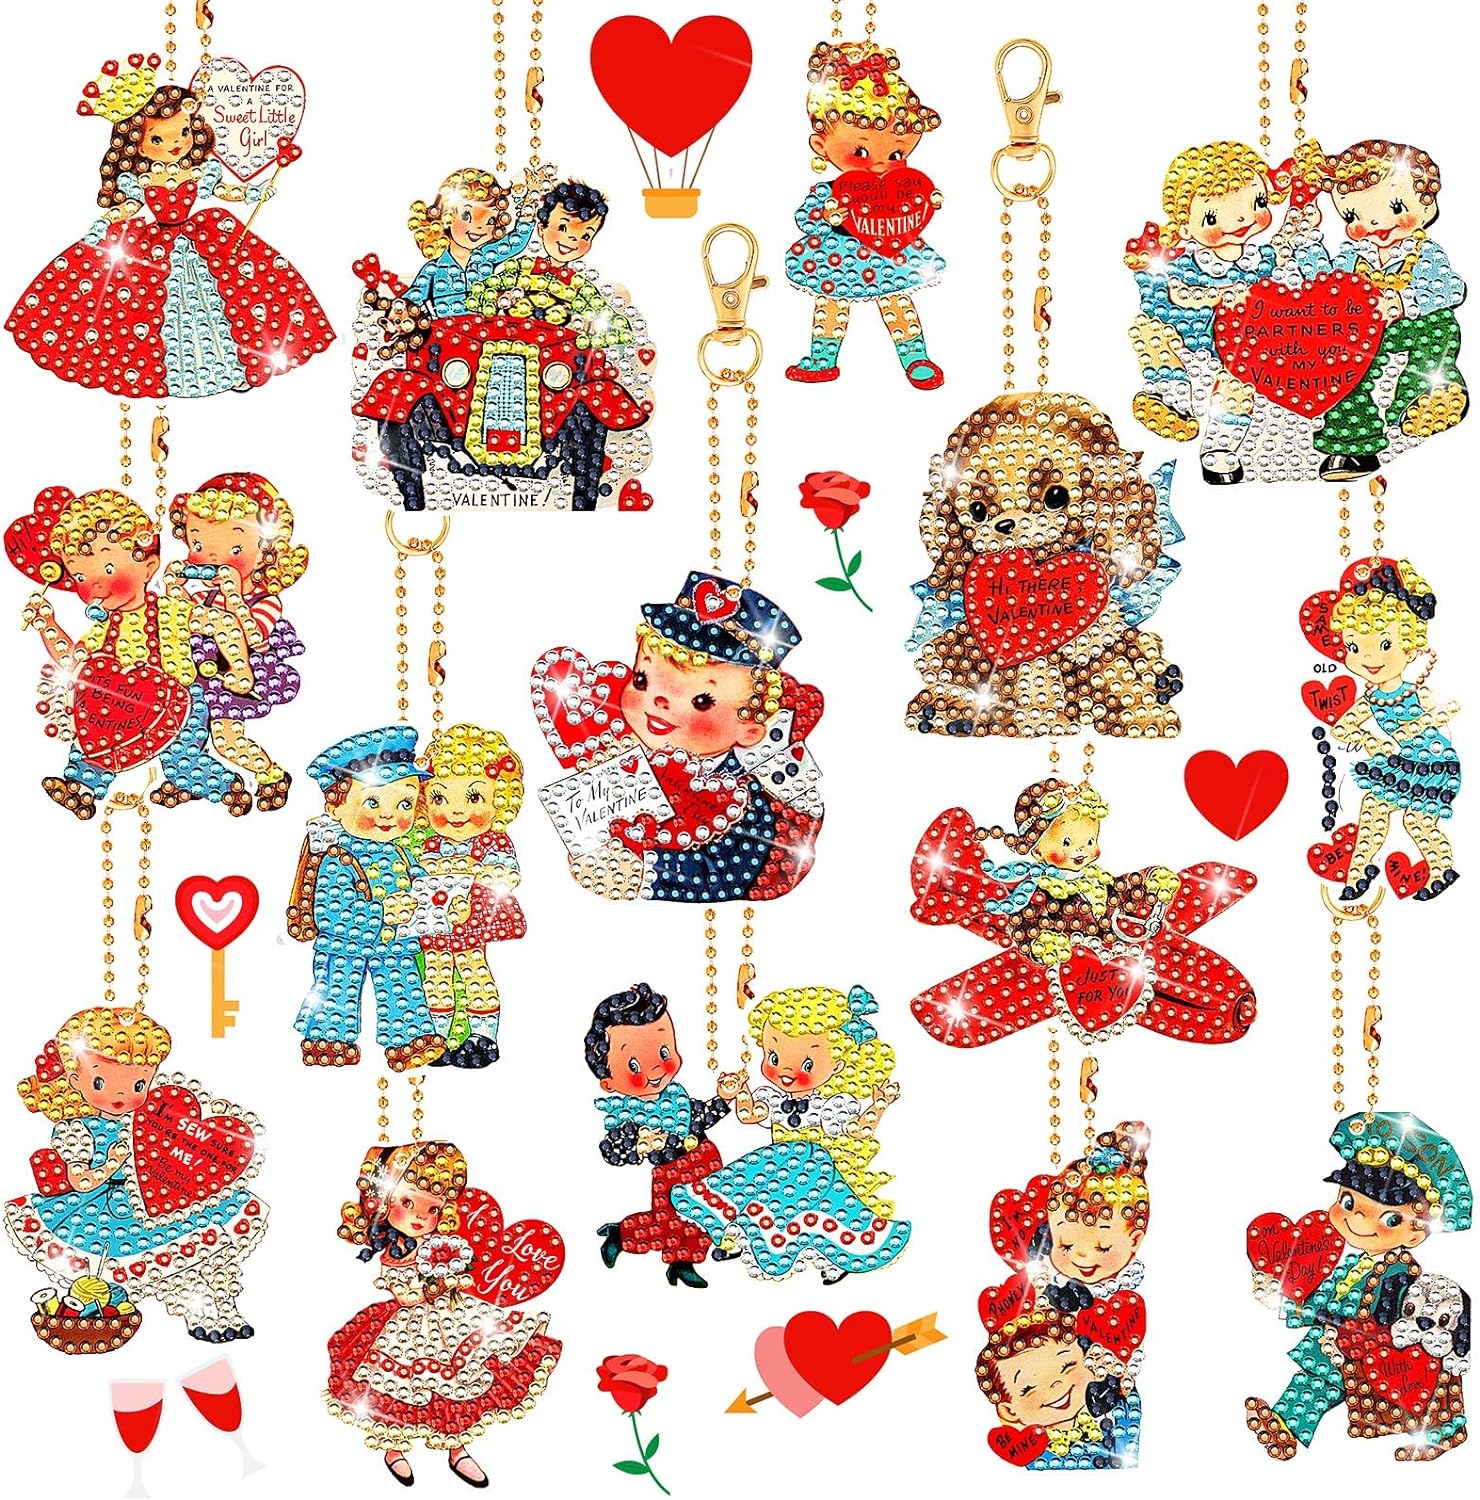 BBTO 15 Valentine' Day Diamond Painted Keychains Art Ornaments 5D DIY Red Valentine' Day Heart Kid Pet Patterns for Children' DIY Crafts (Cute Couple)